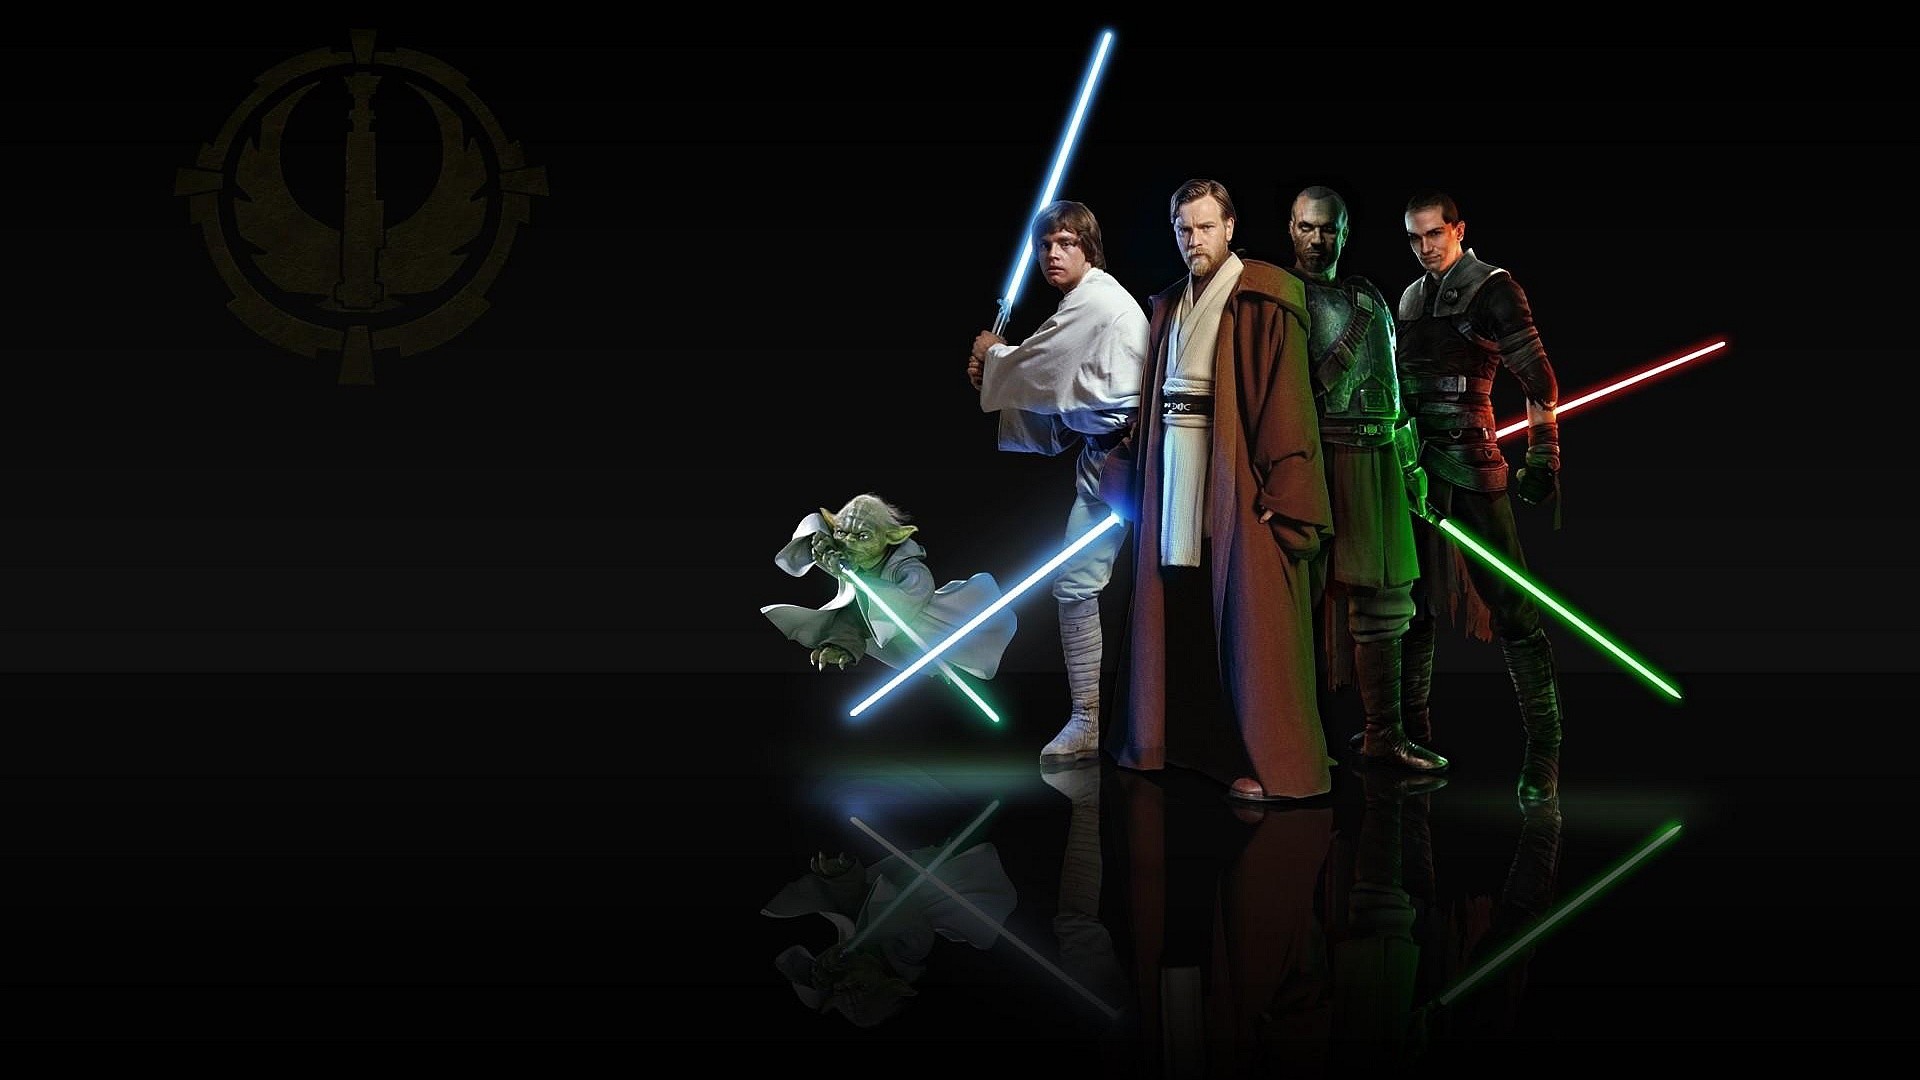 1920x1080 Main Charaters Star Wars Movies.